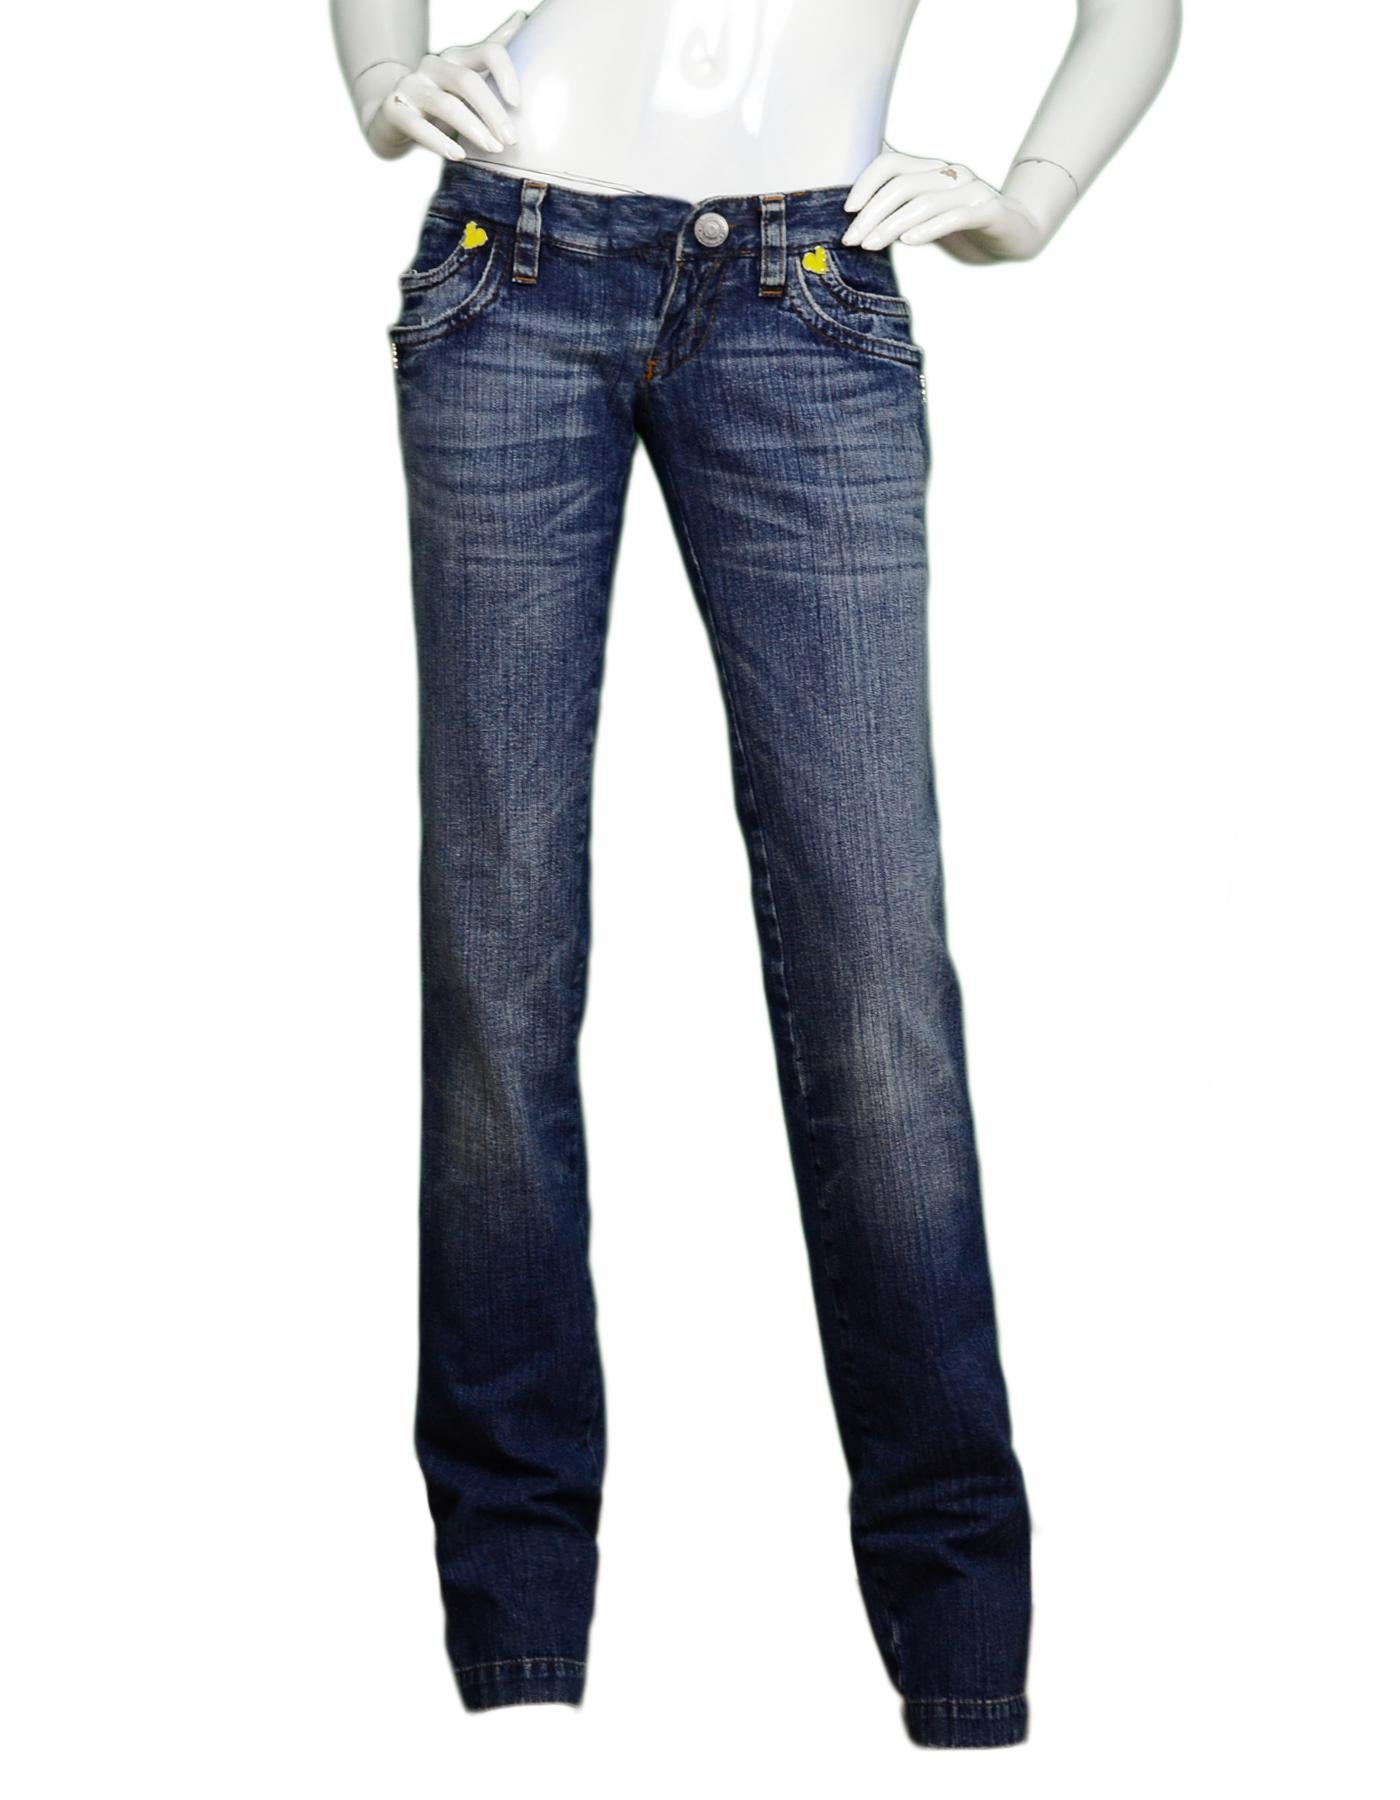 DSquared Blue Denim Jeans W/ Embroidery NWT Sz 40

Made In:  Italy
Color: Blue, yellow, red
Materials: 100% cotton
Overall Condition: Excellent condition with original tags attached 
Estimated Retail: $410 + tax
Includes:  Original